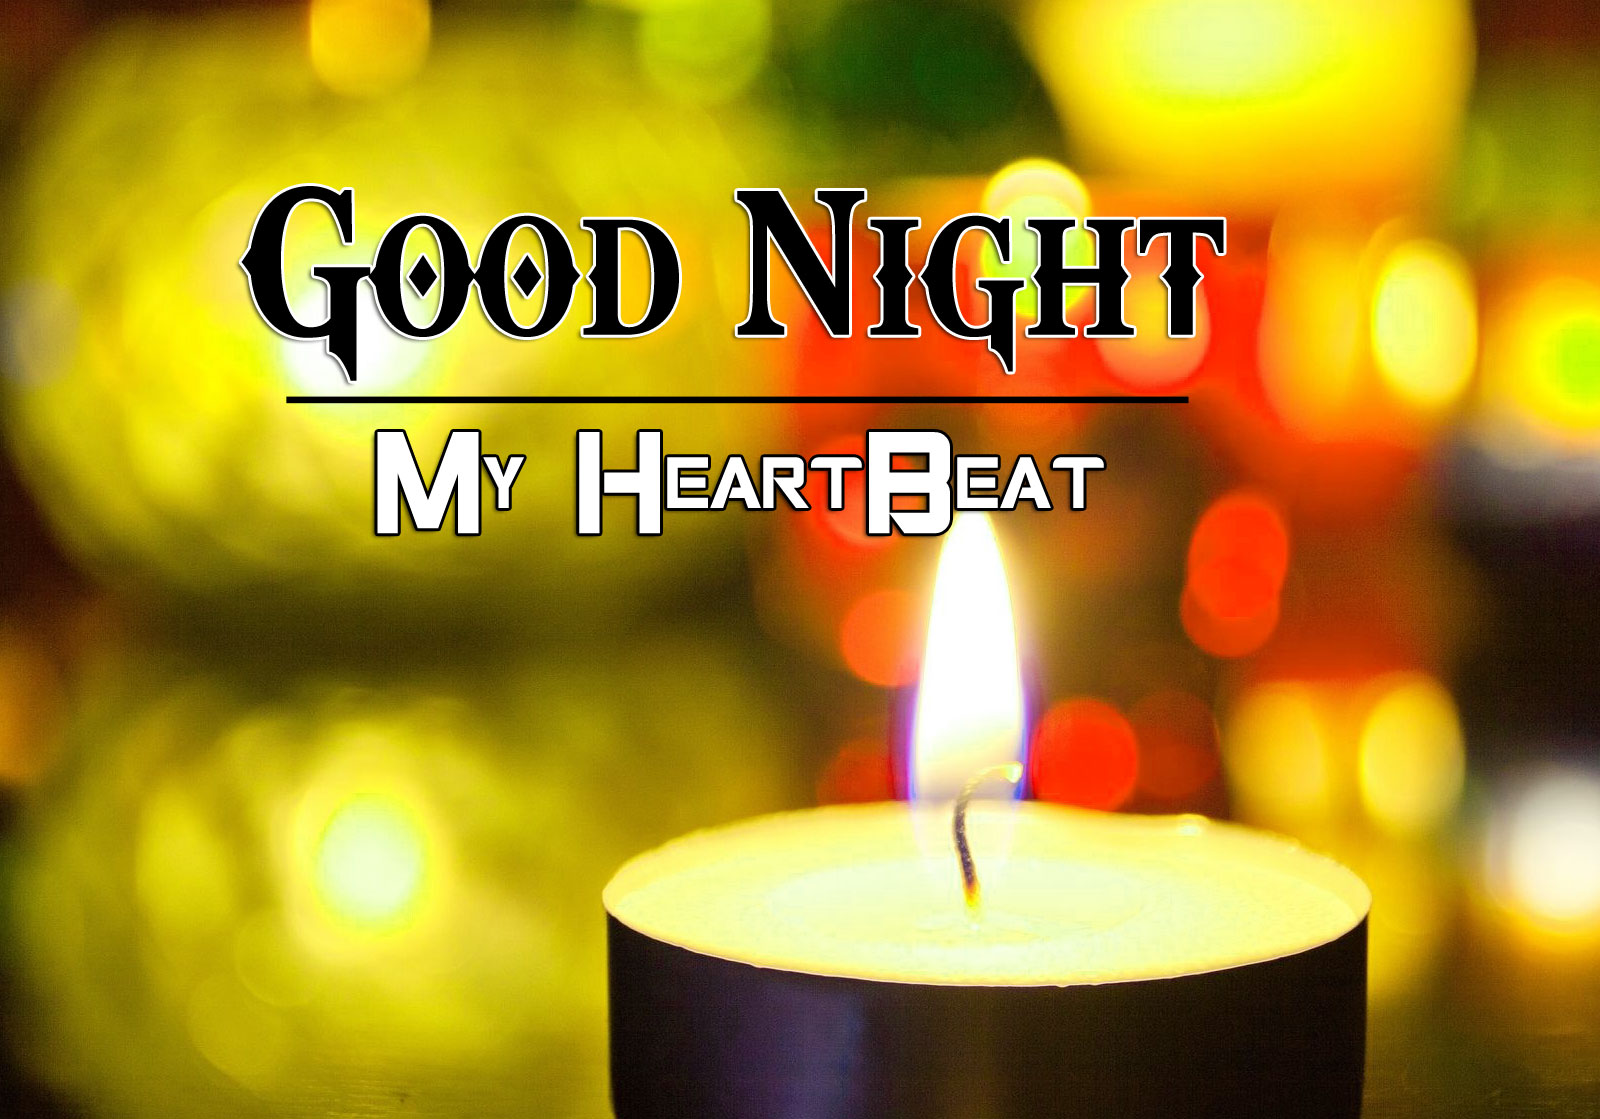 Free Beautiful Good Night Images for Facebook